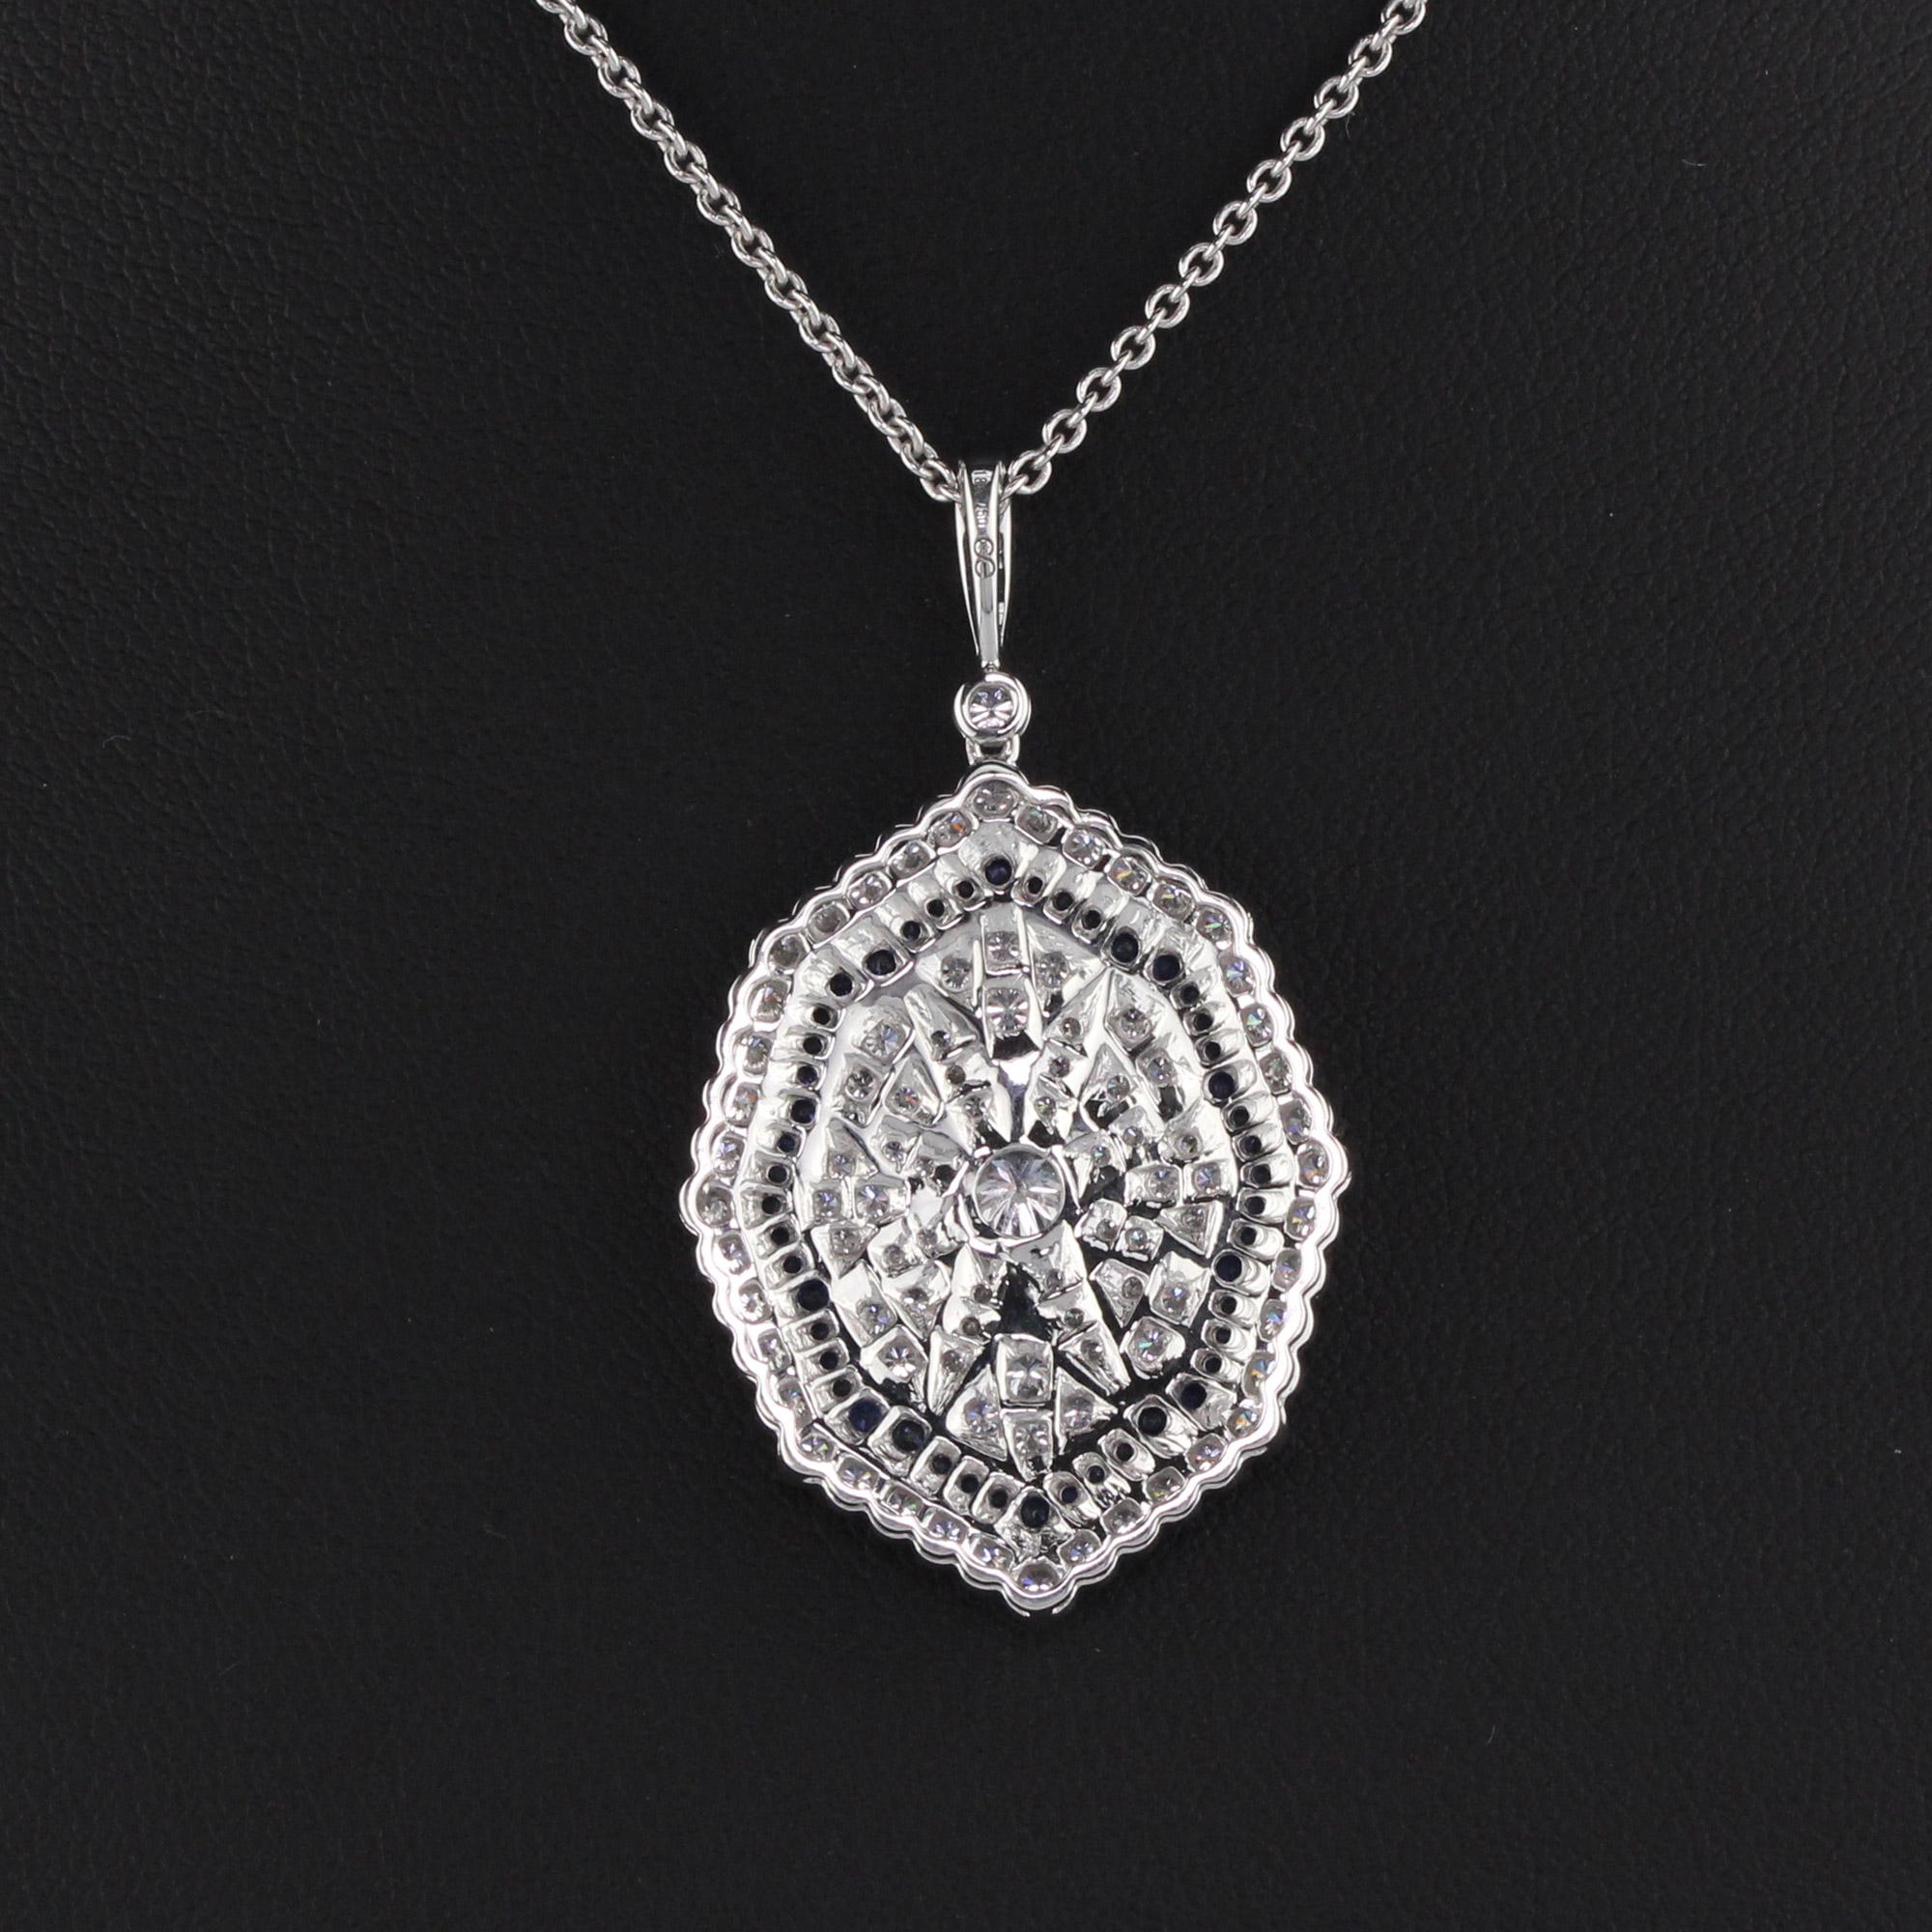 18K White Gold Diamond and Sapphire Necklace In Good Condition For Sale In Great Neck, NY